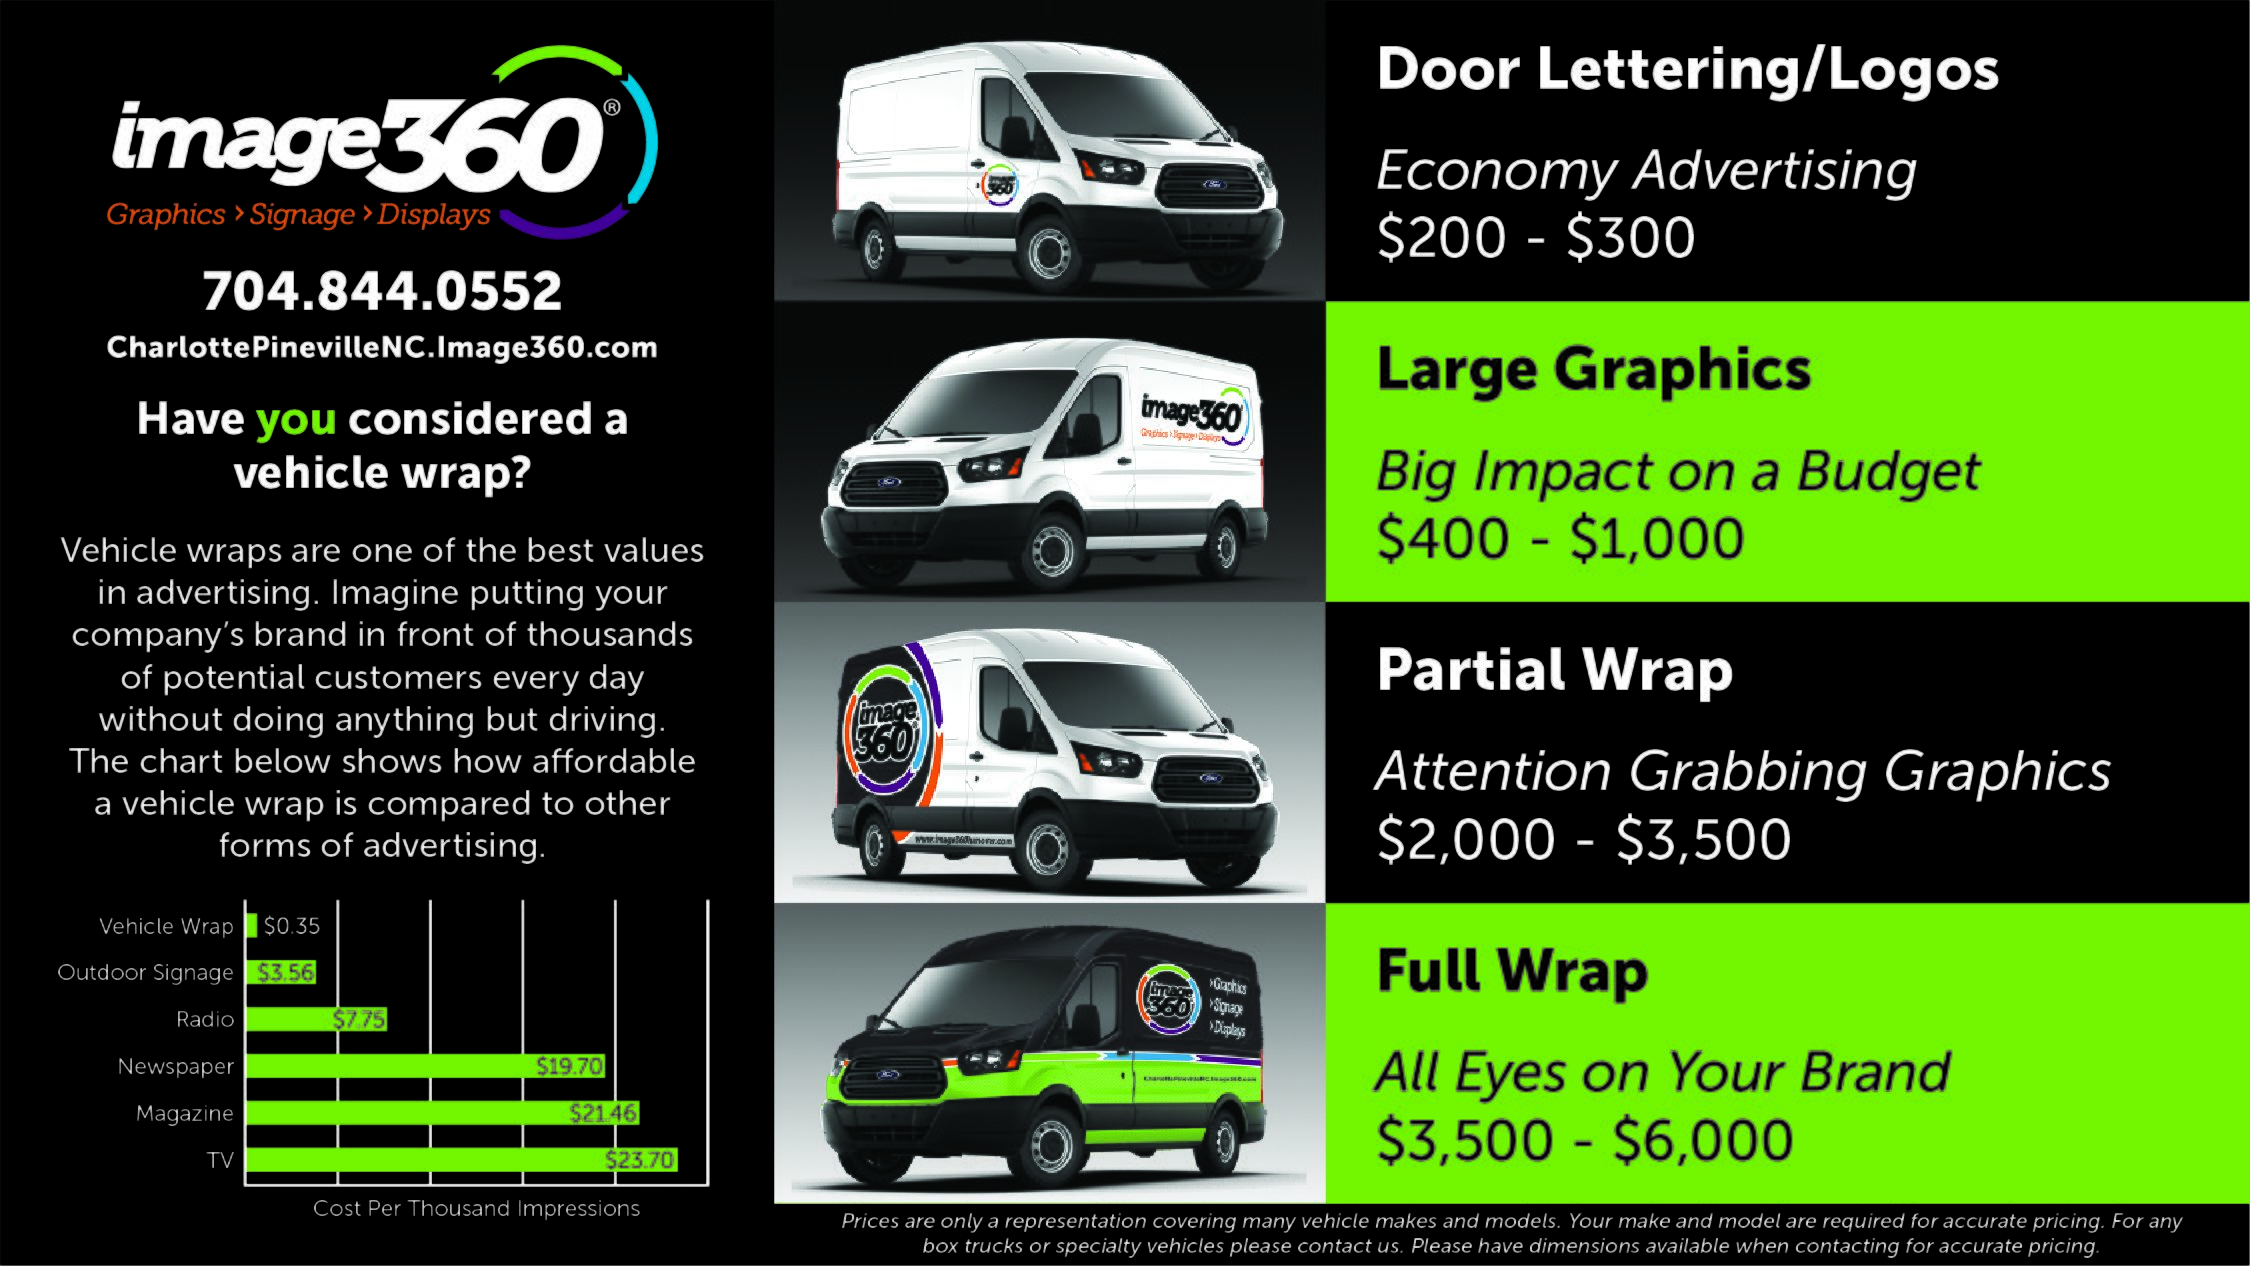 Image360 - Charlotte Pineville | Vehicle Wrap Pricing Guide